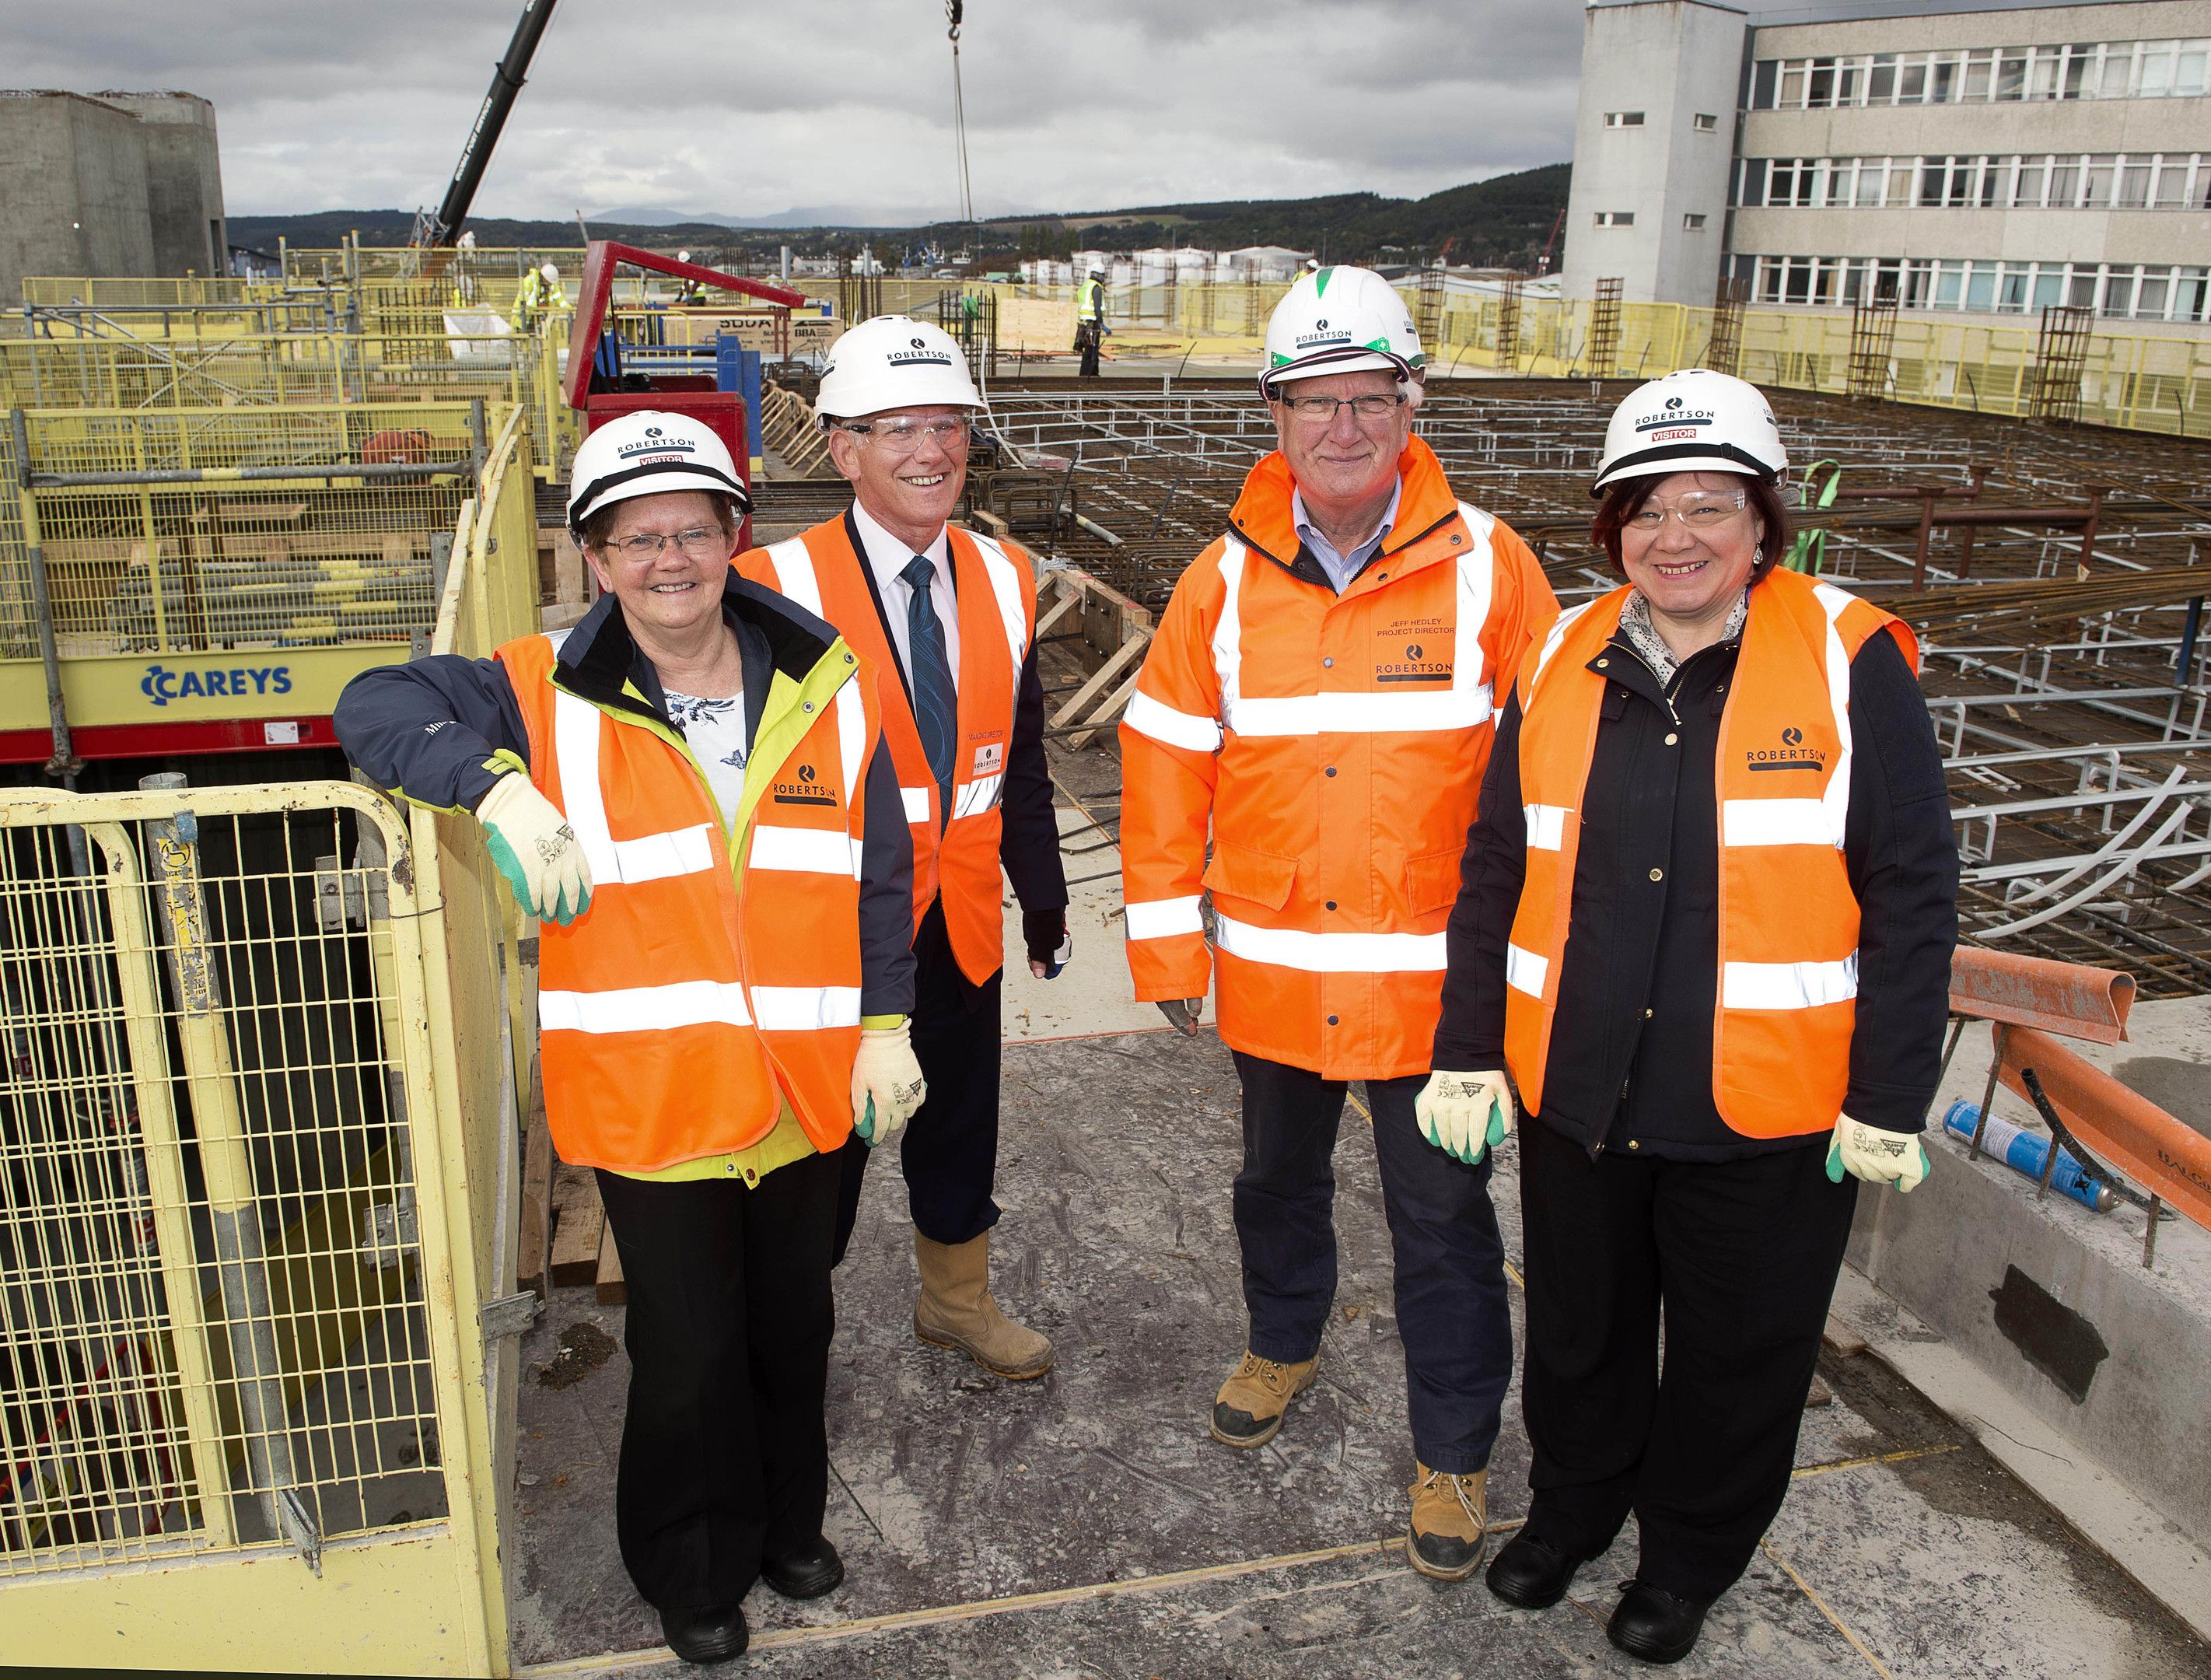 Margaret Reid of Scottish Courts and Tribunal Service,
Frank Reid and
Jeff Hedley, both of Robertson Construction, and Nikki Burnel, also of Scottish Courts and Tribunal Service, at the site of Inverness' new Justice Centre